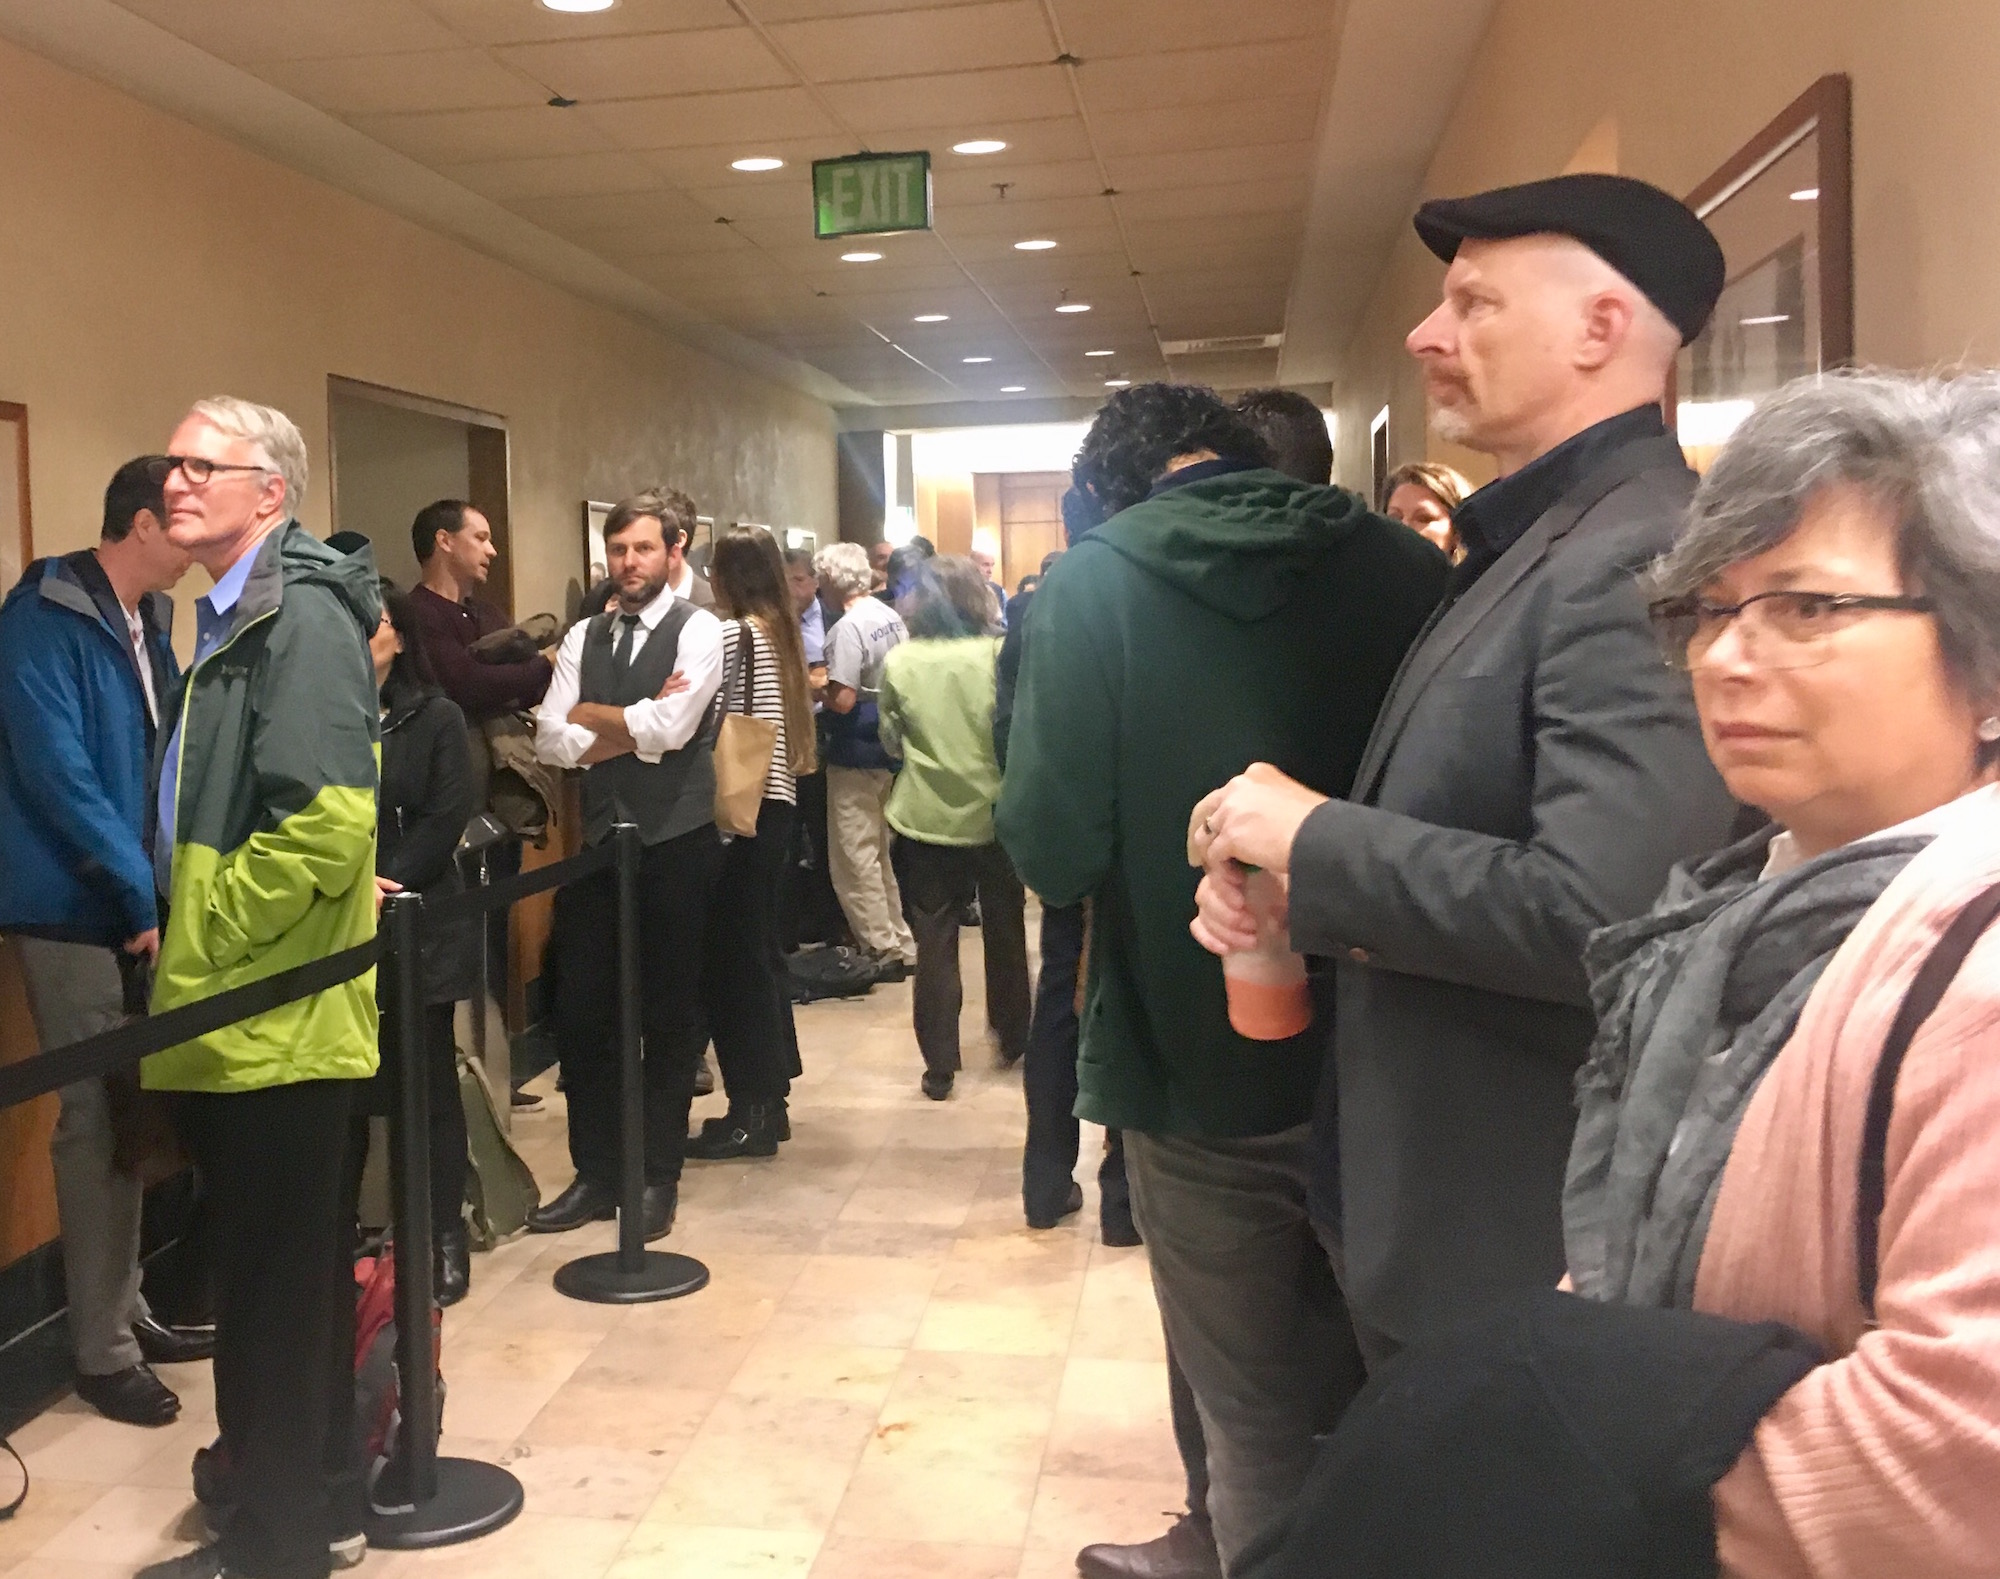 People lined up outside courtroom